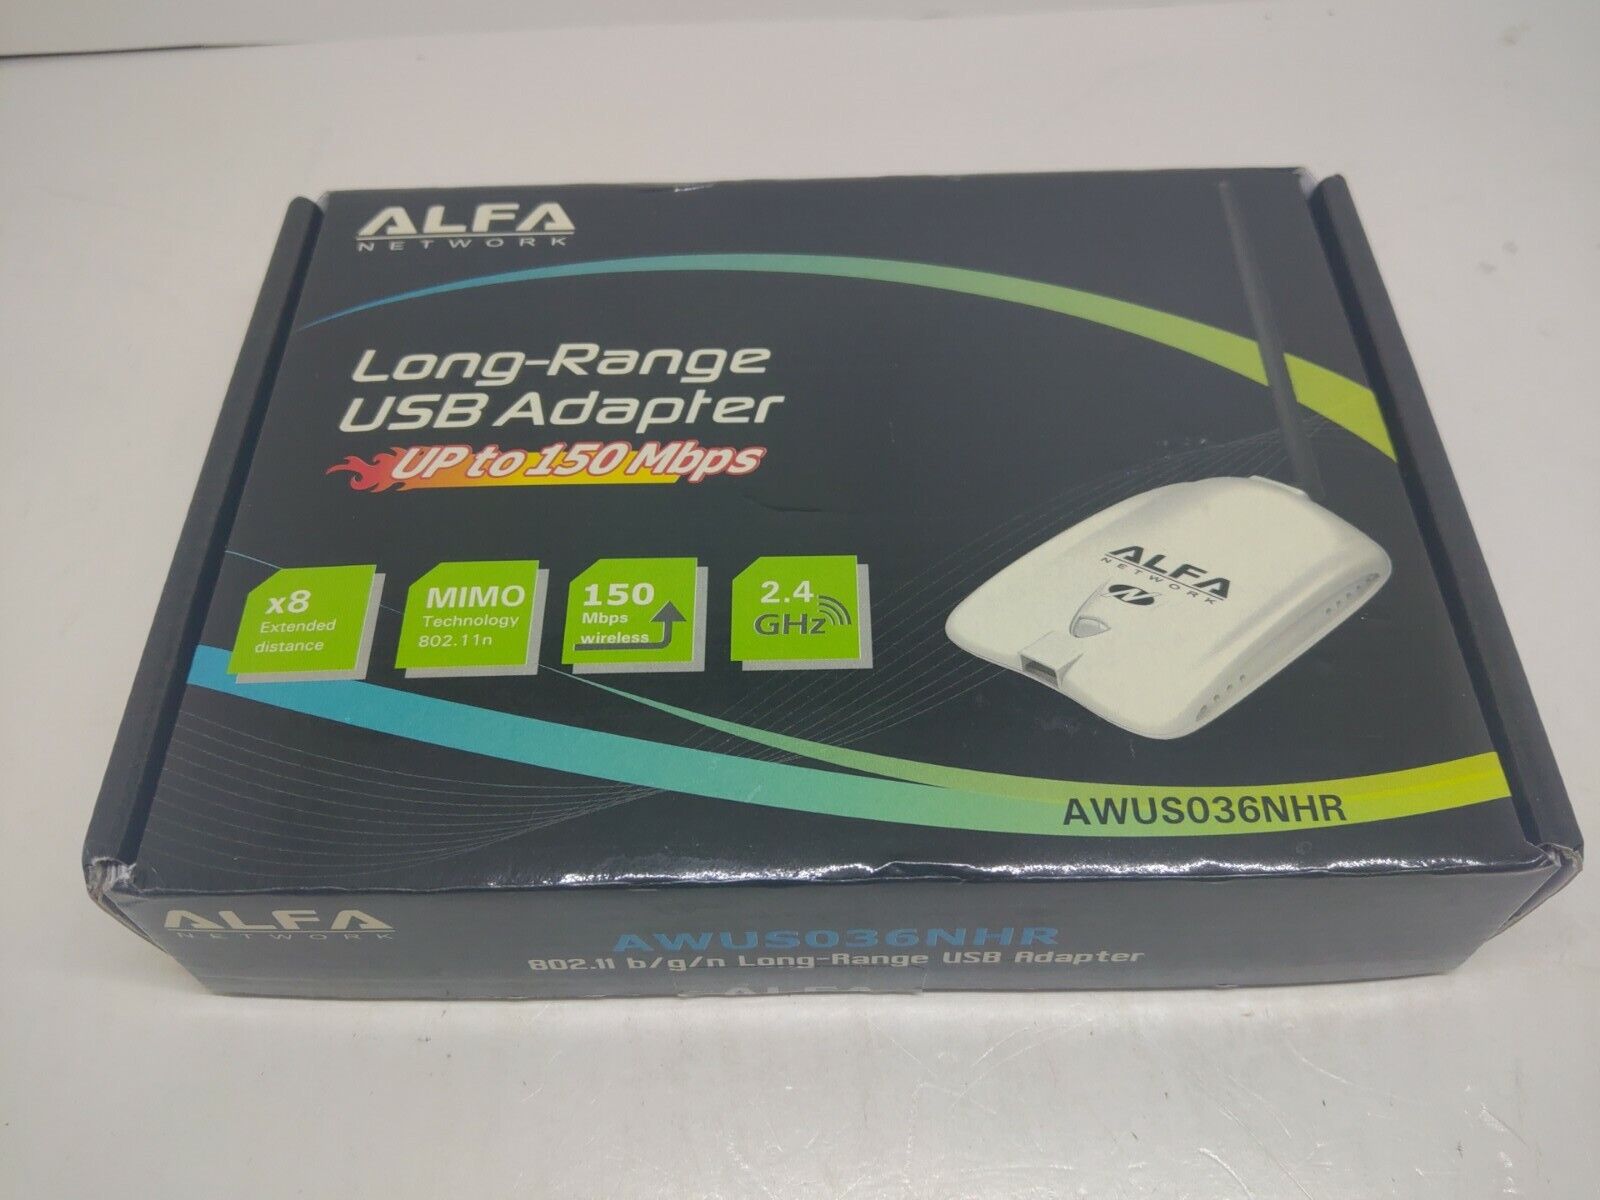 Alfa Awus036nhr High-gain 2000mw 2w 802.11 B/g/n Wireless Usb As is For Parts